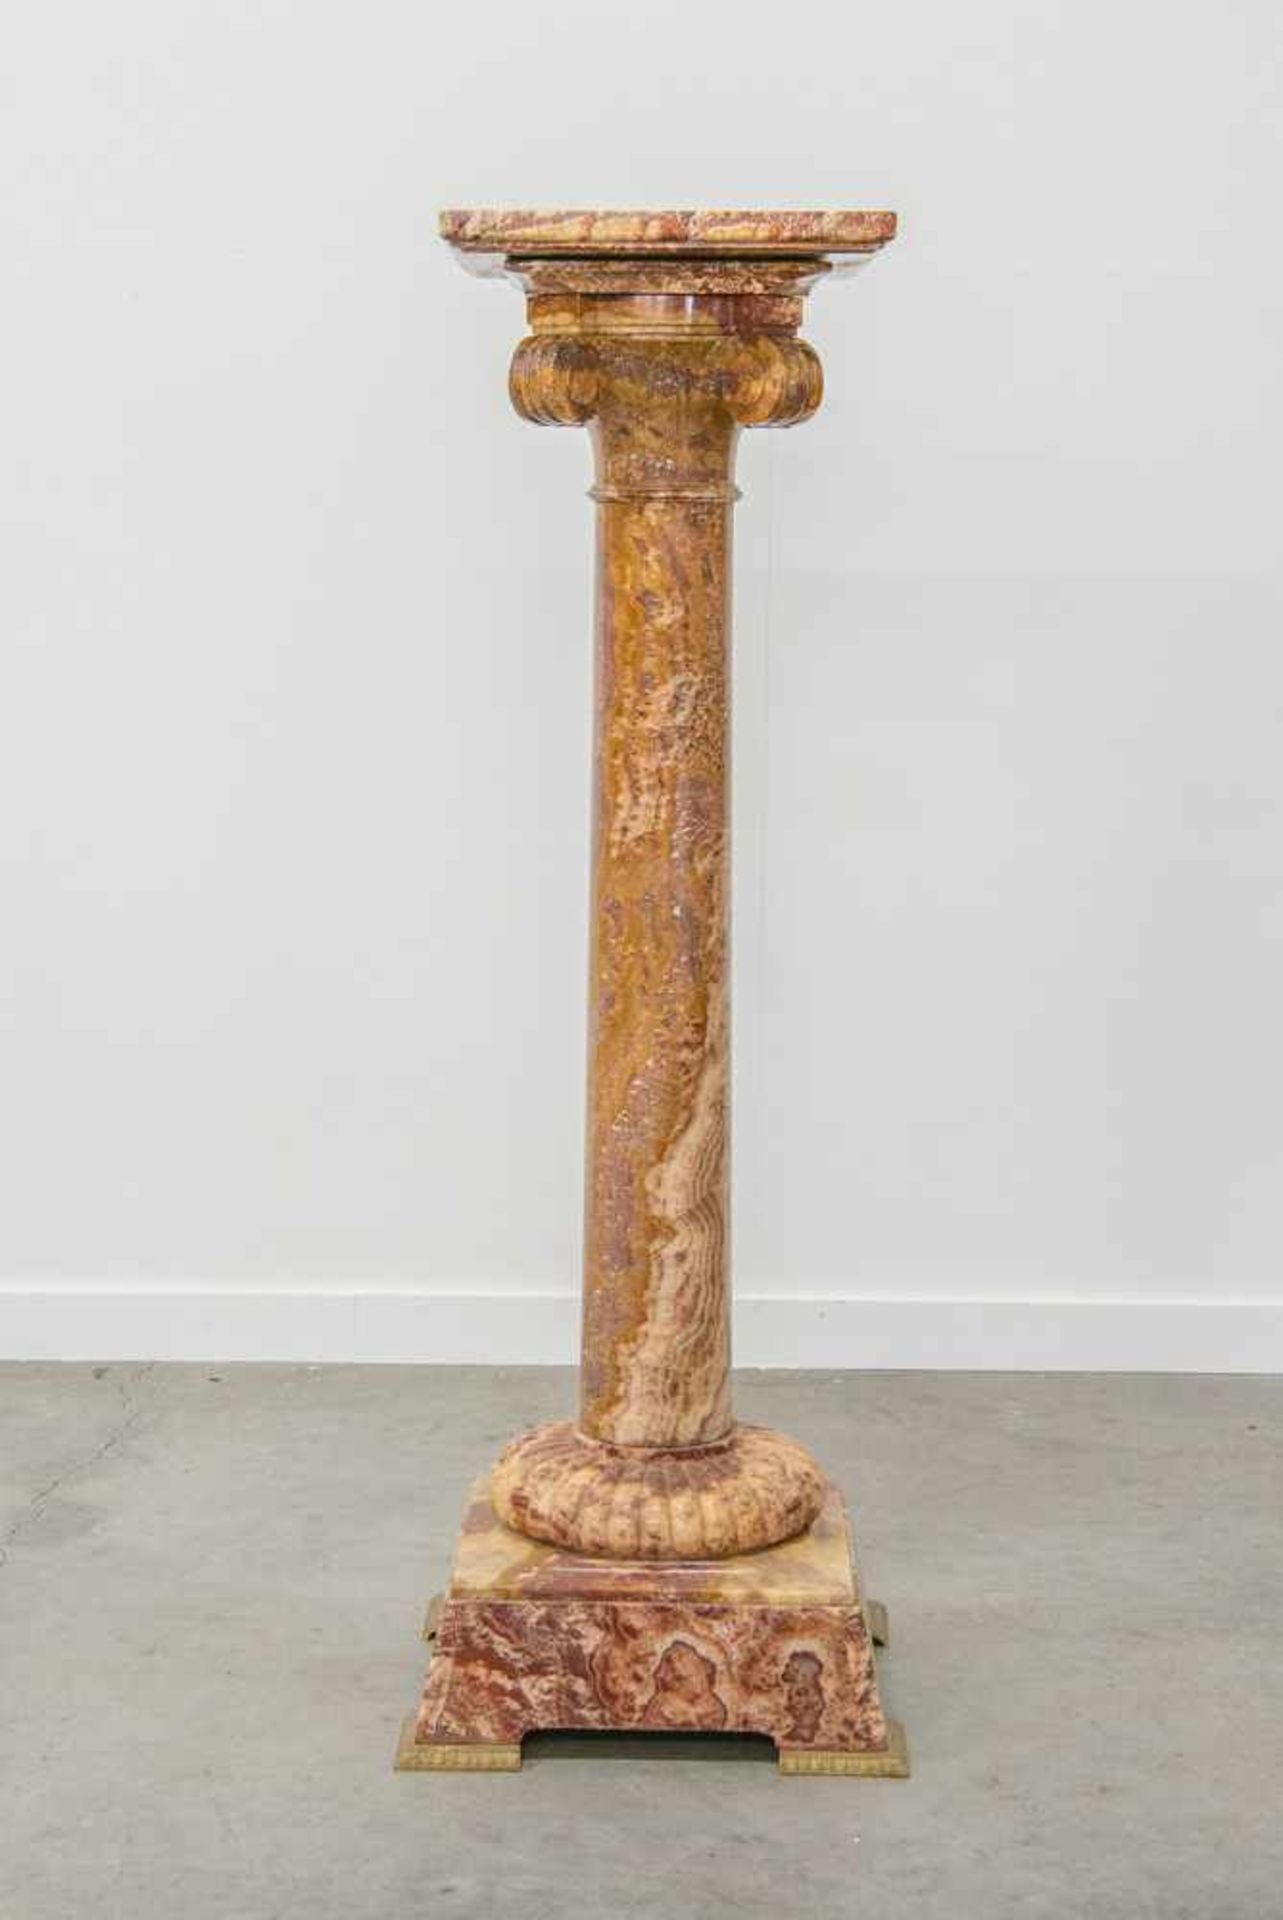 Pedestal made of red Onyx, with a swivel top and standing on bronze feet. Marked, "Fizel". 19th